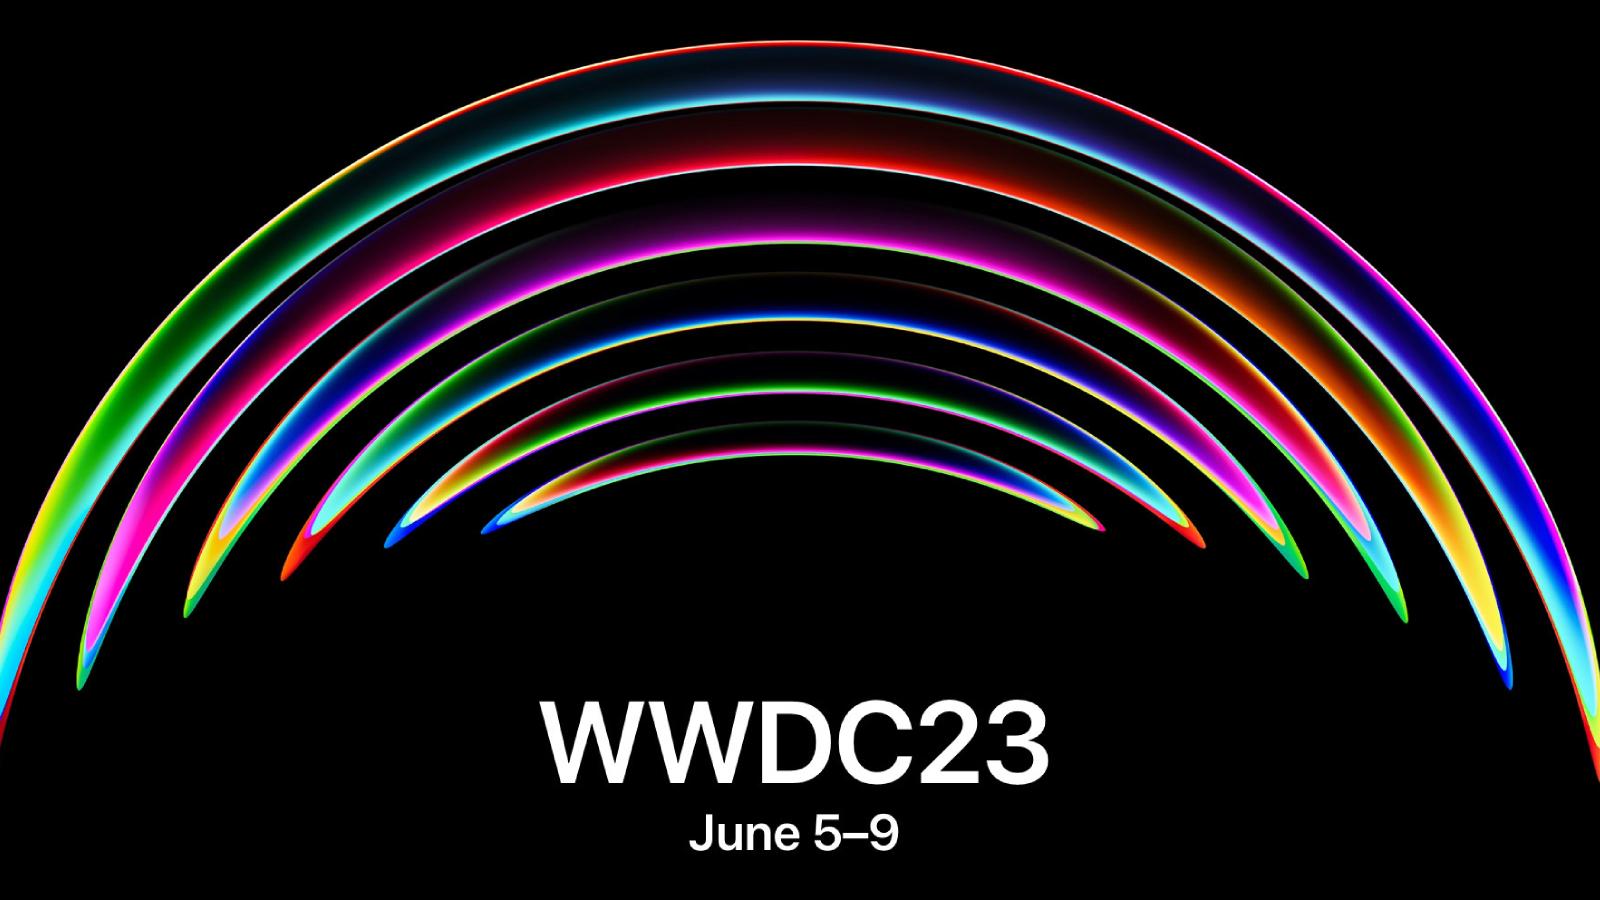 WWDC teaser image with rainbow on black background